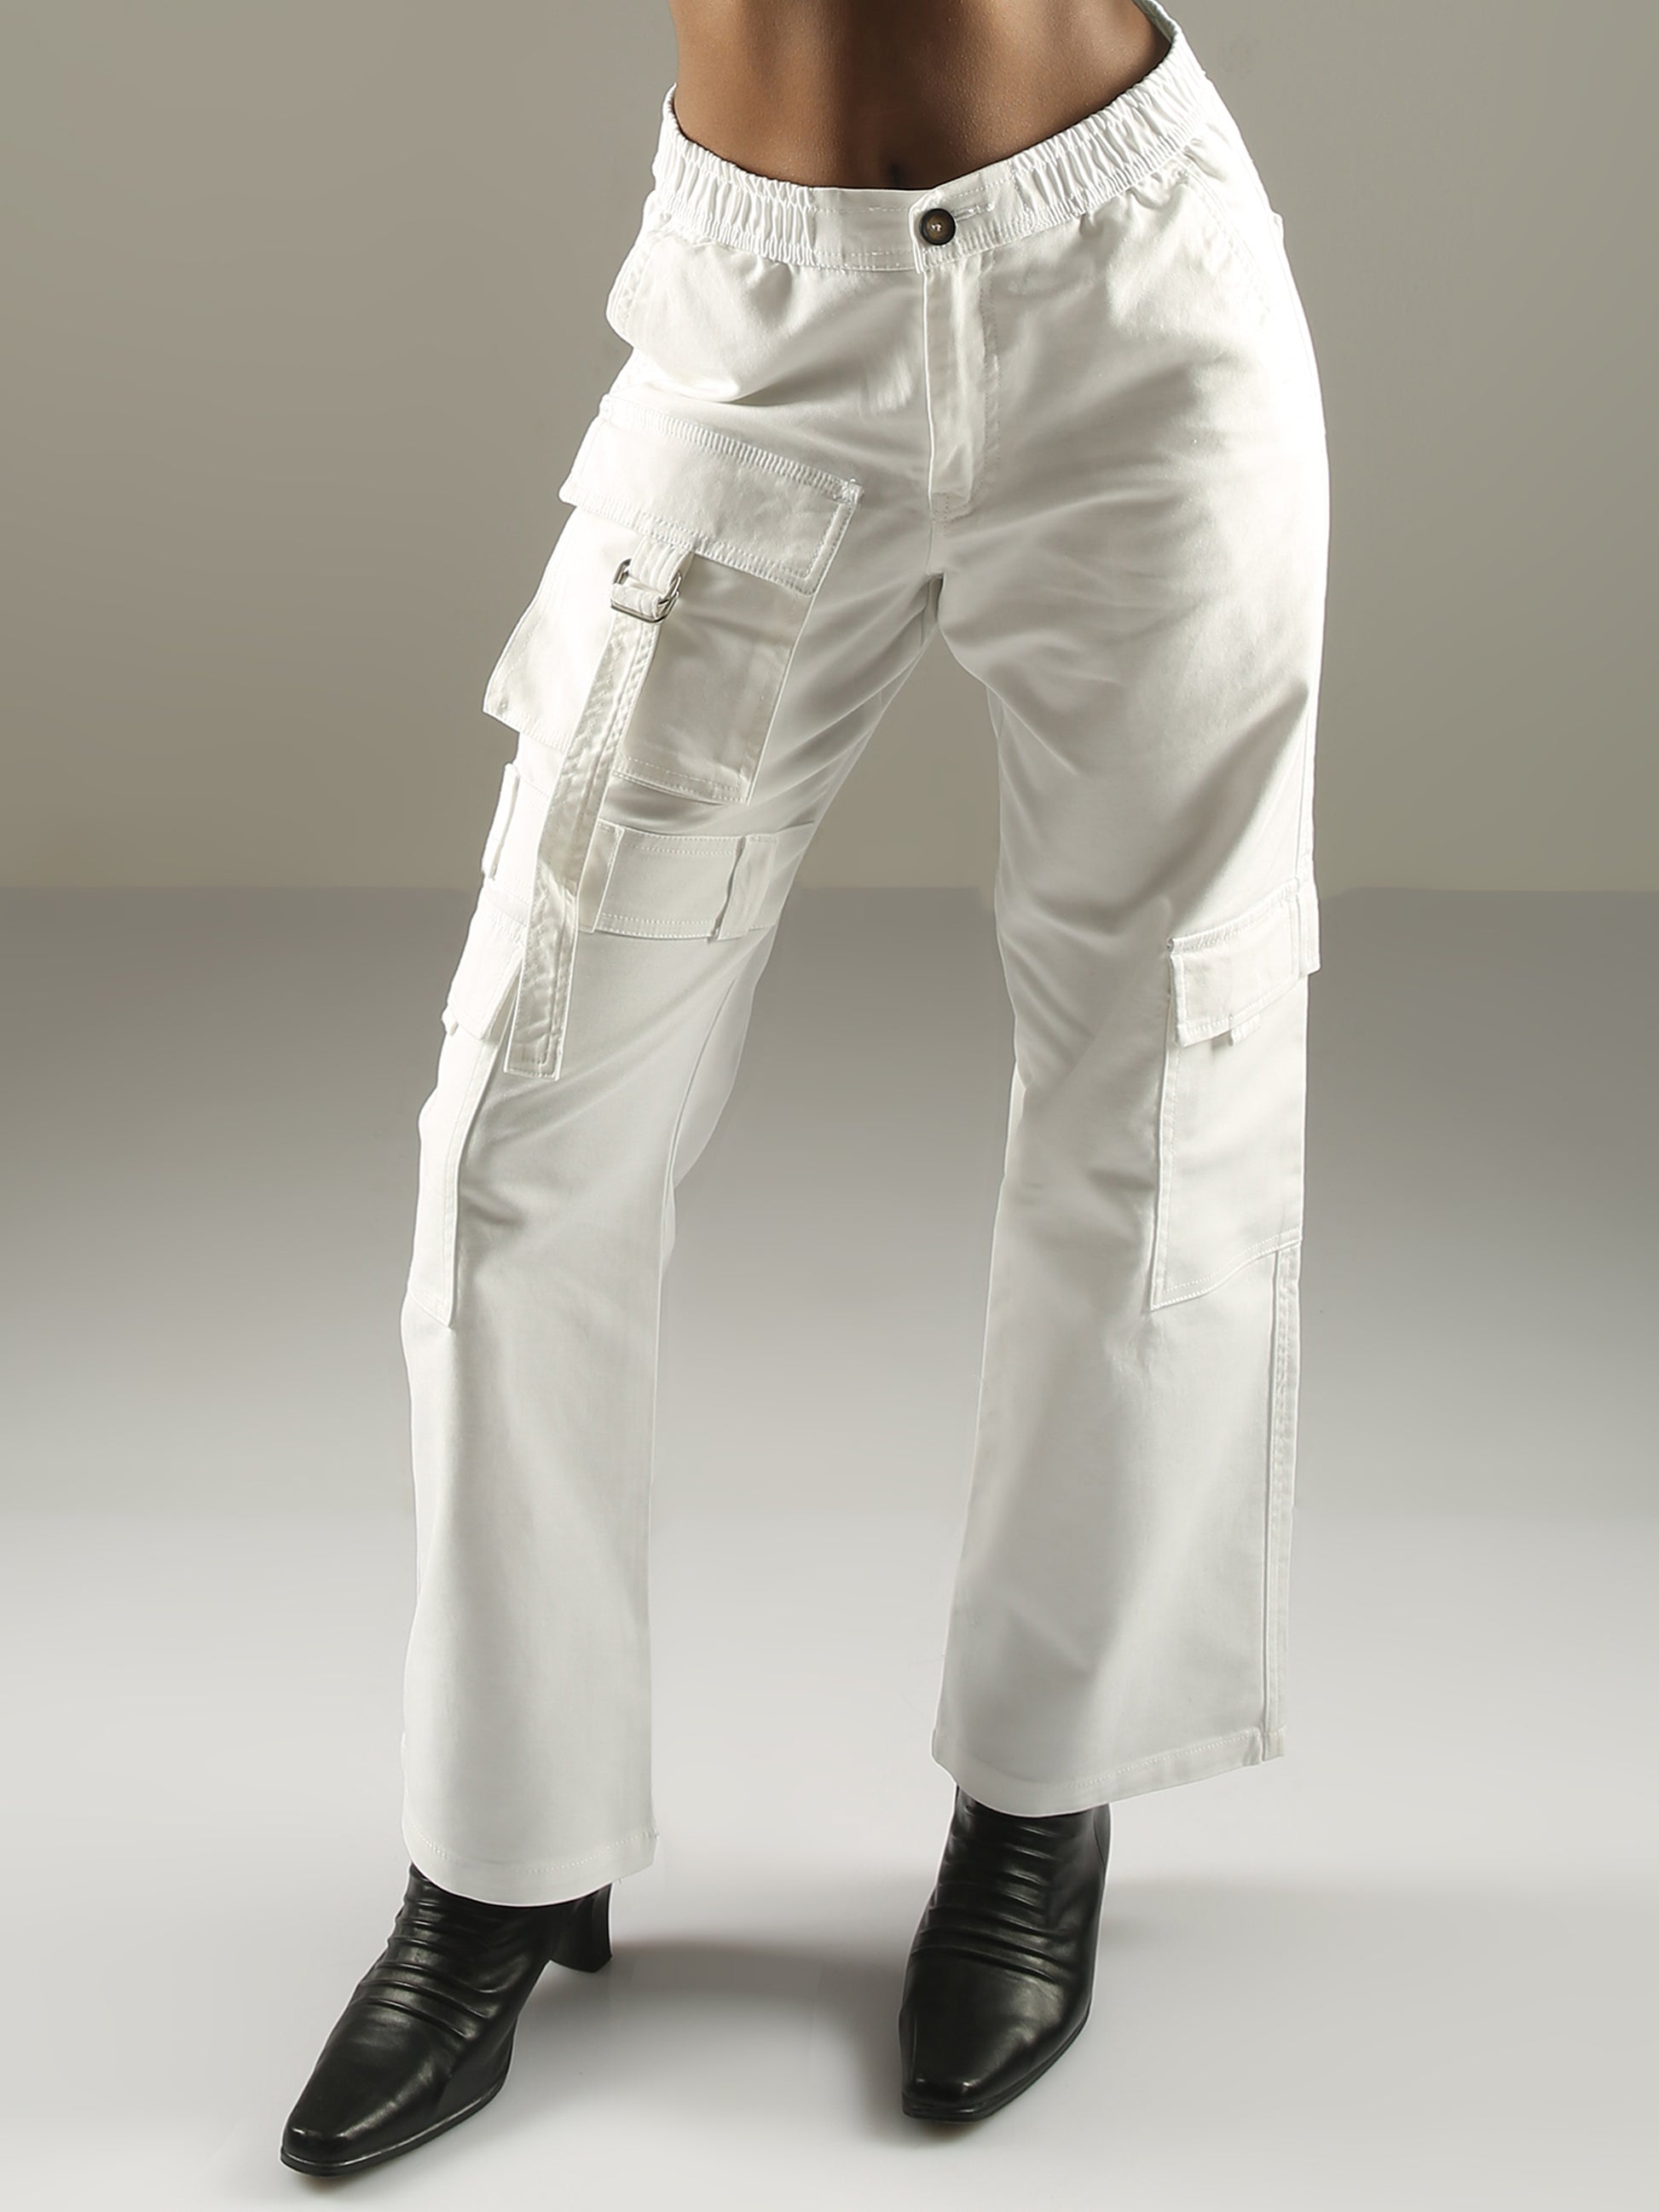 multi pocket baggy trousers flared cargo pants is popular. Shop on